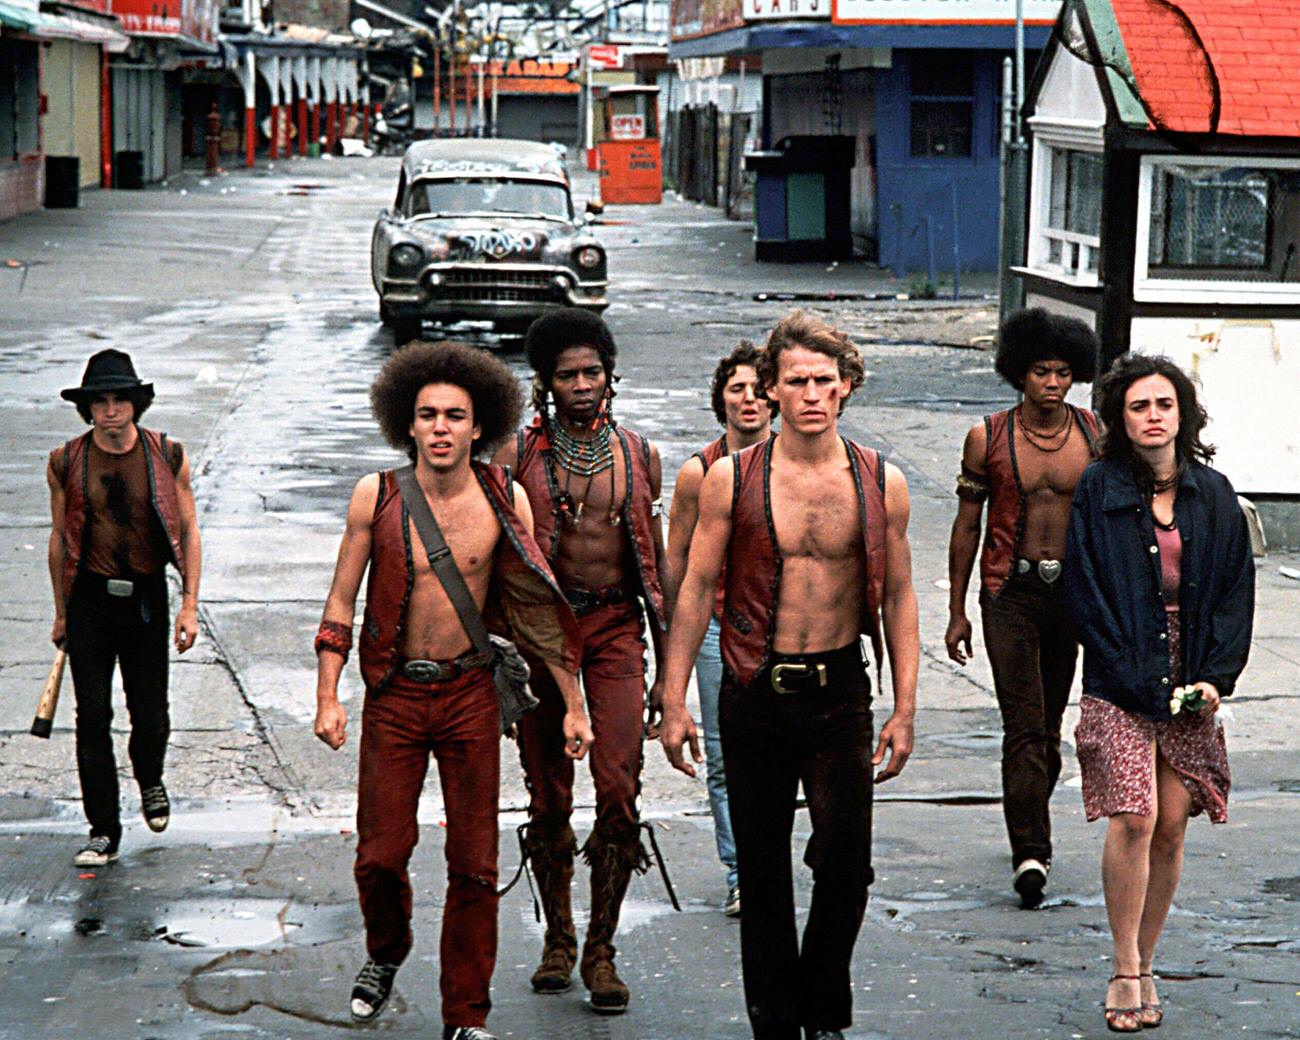 Scene From 'The Warriors' With The Gang Walking Along Bowery Street In Coney Island, Brooklyn, 1979